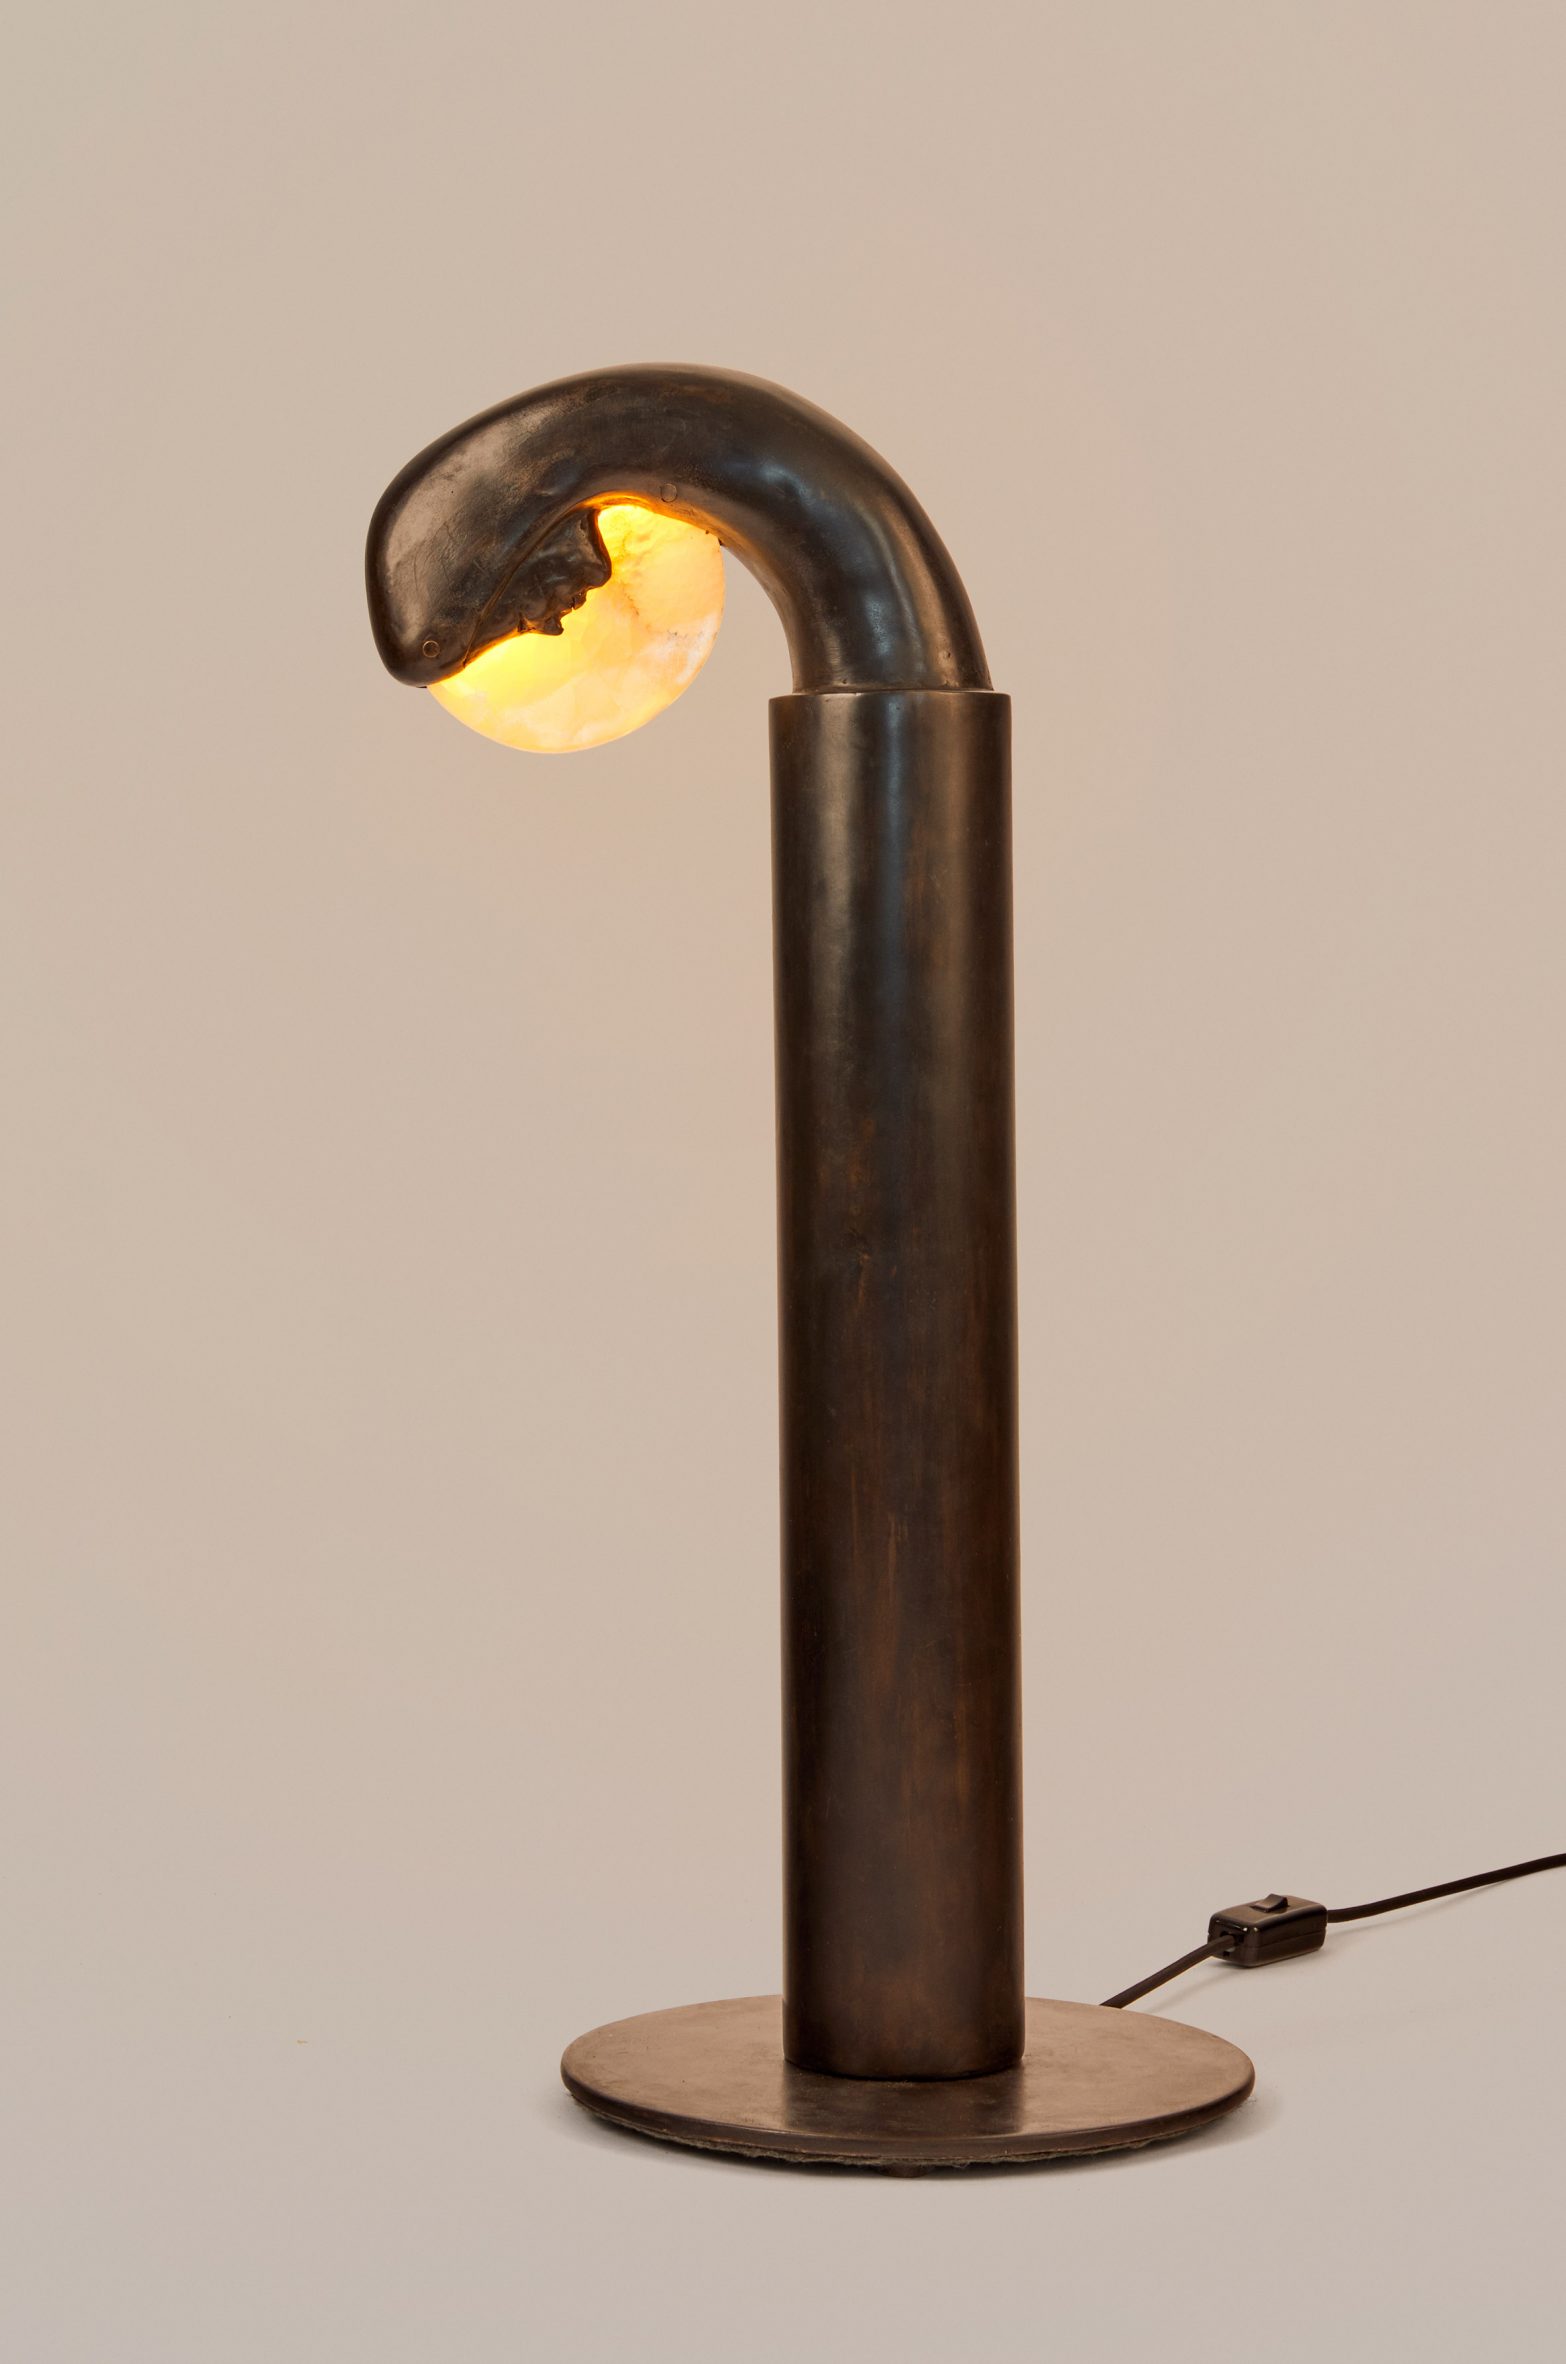 Curved lamp by Enrico David